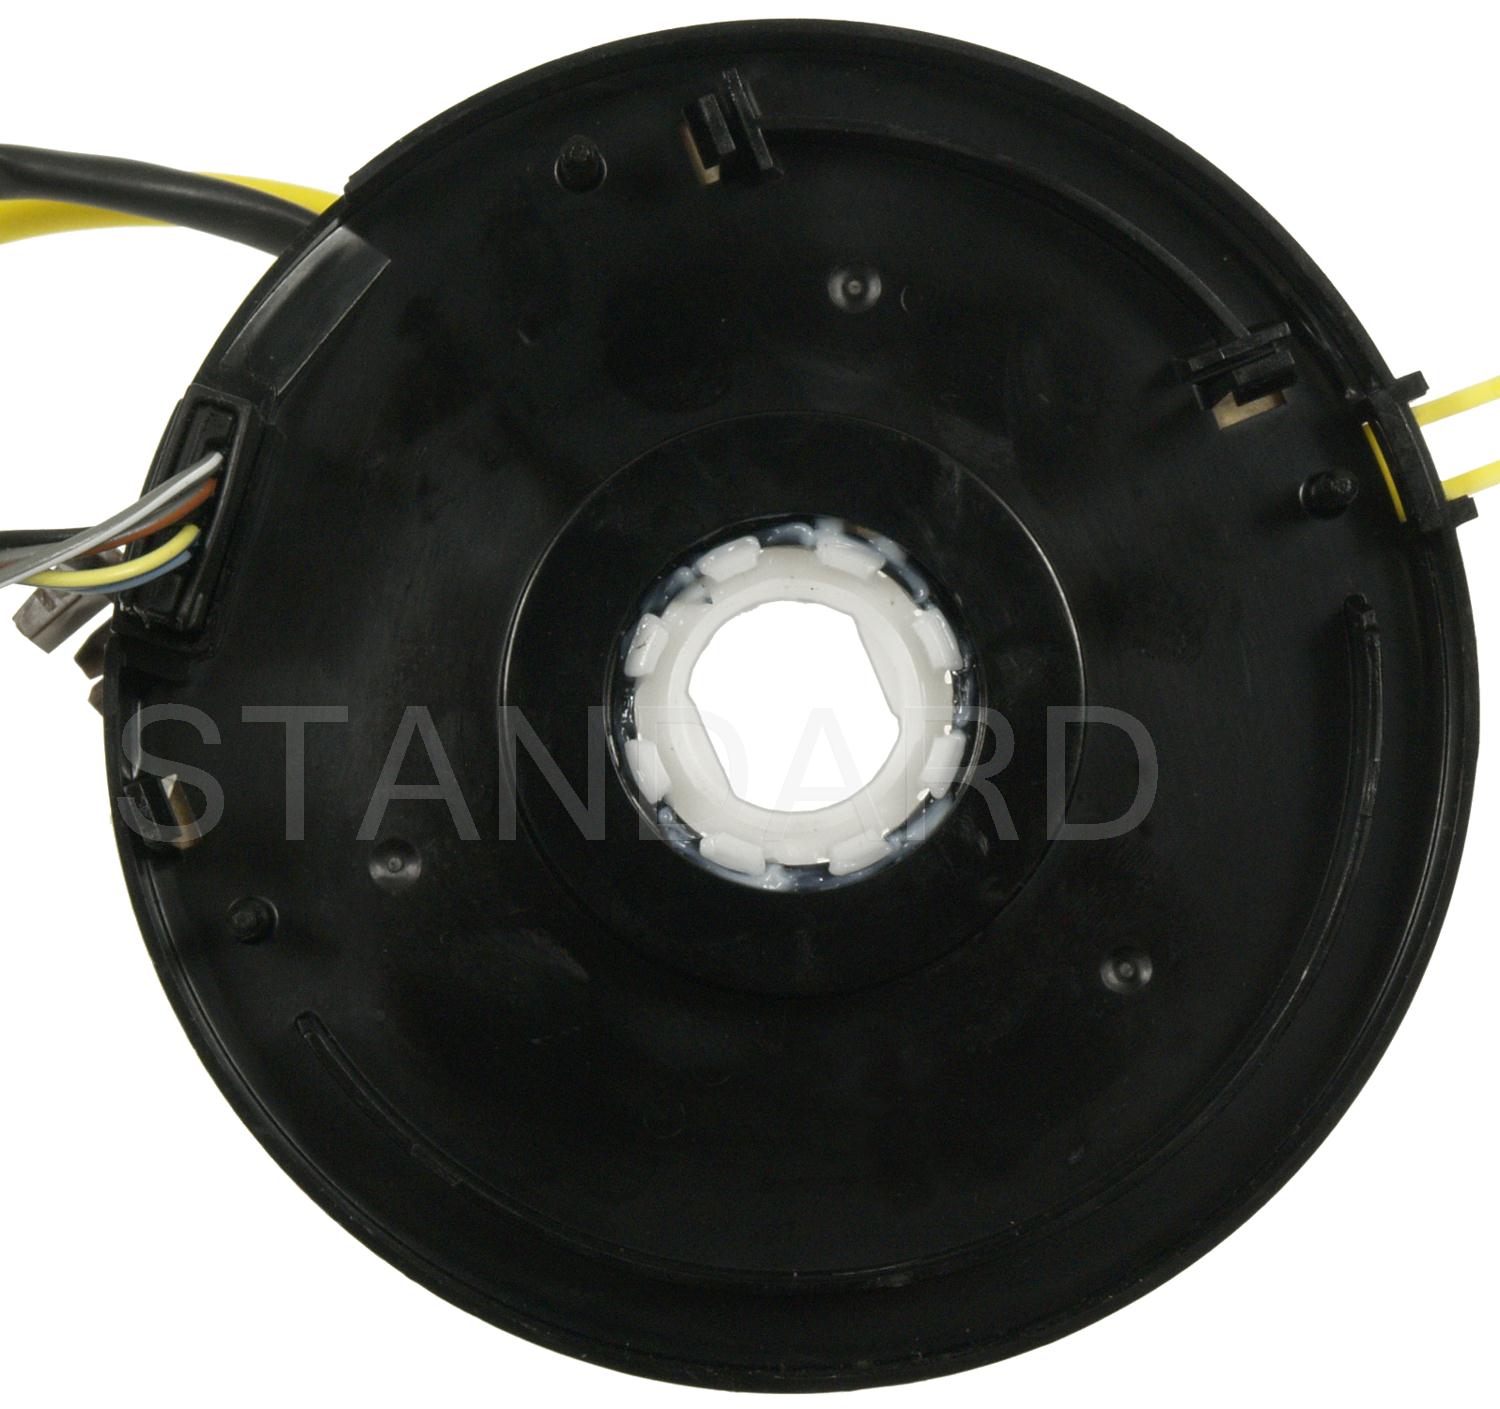 Picture of Standard Motor Products CSP130 Standard Switch - Dimmer